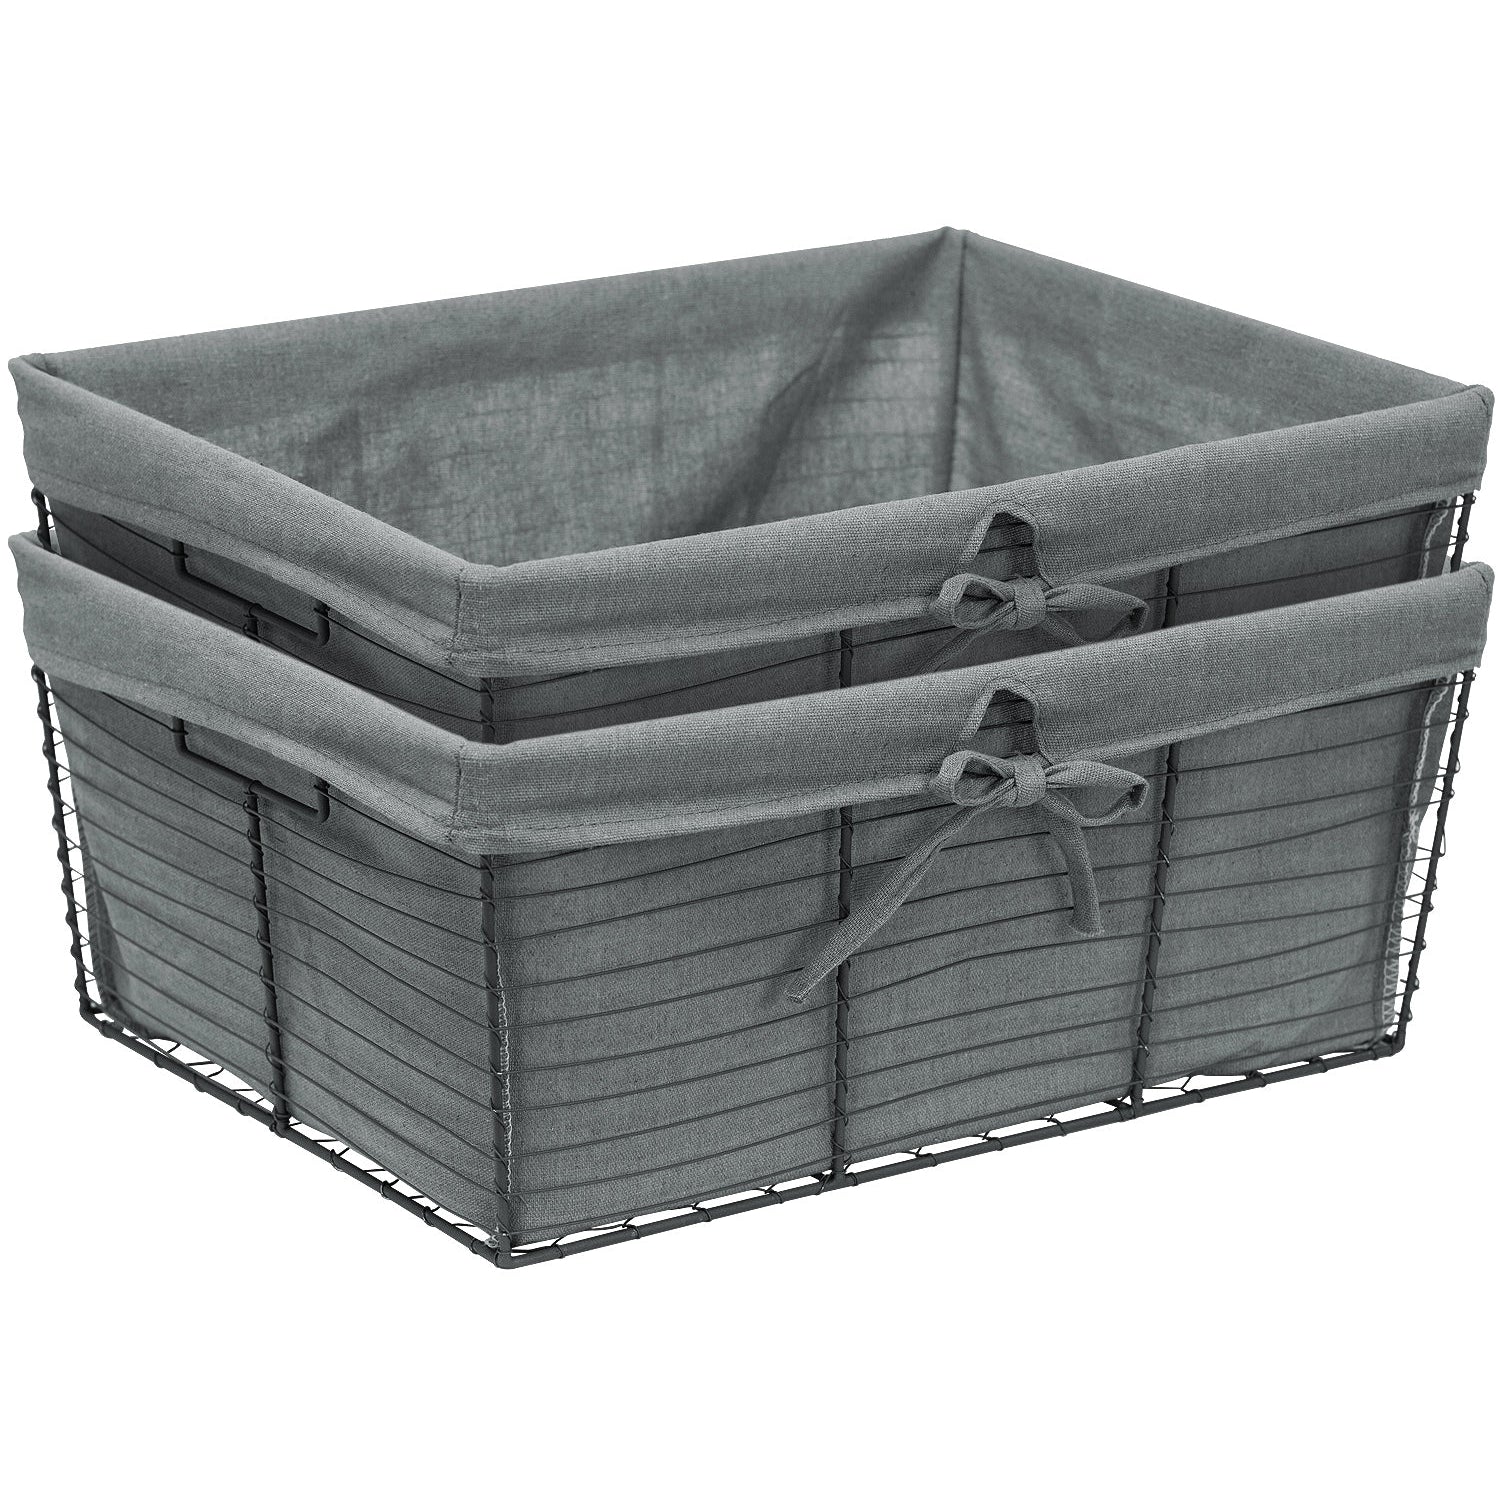 Sorbus Storage Baskets - Woven Paper Rope Material – Sorbus Home